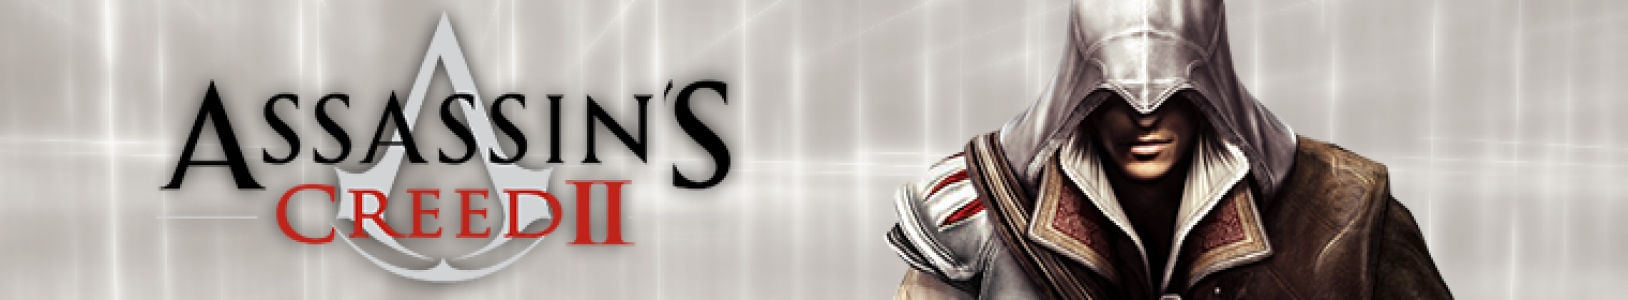 Assassin's Creed II banner